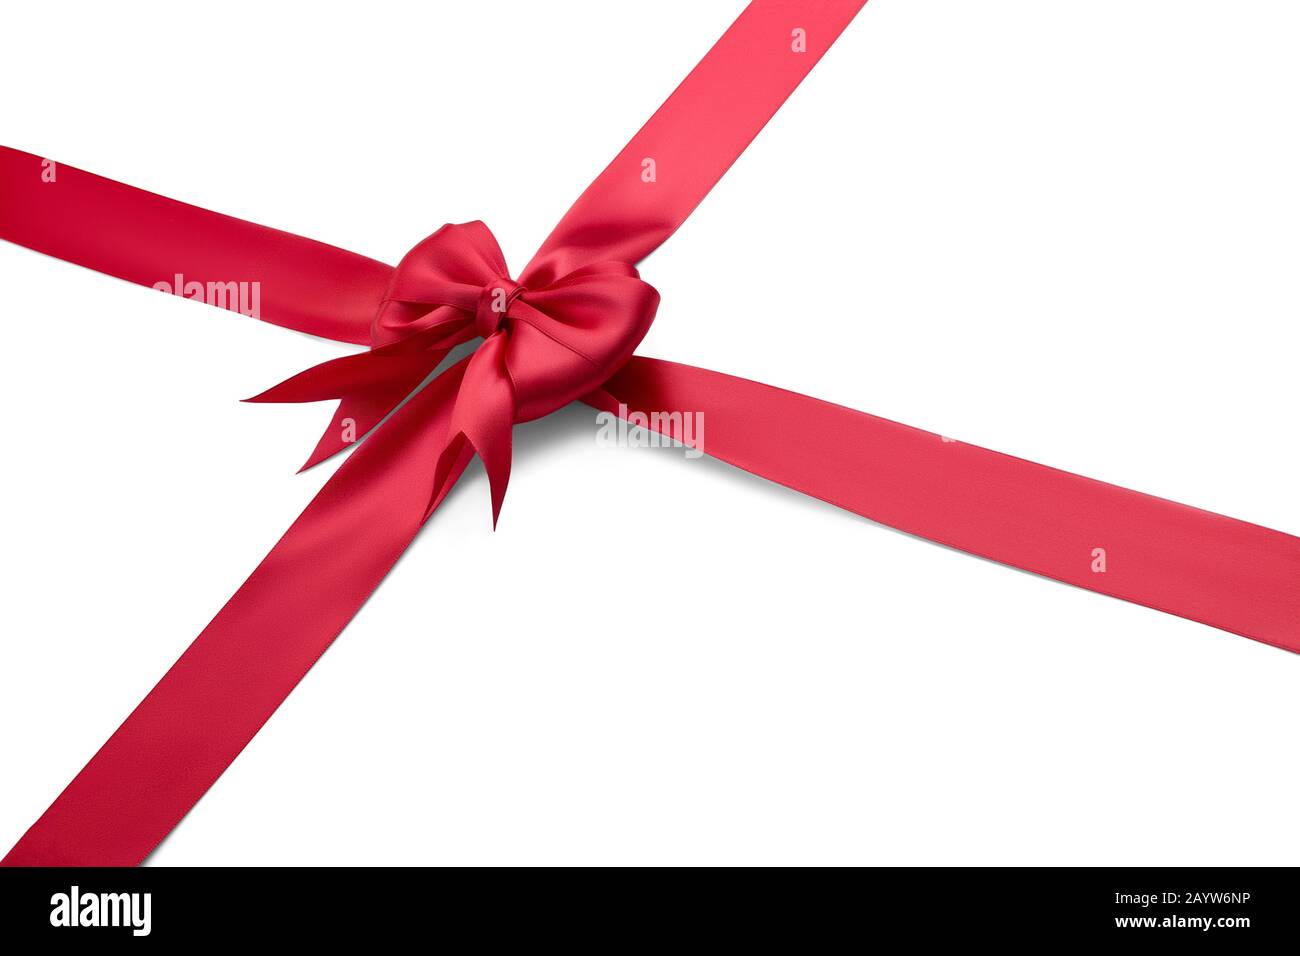 Four Presents Wrapped In White Gift Wrap With Blue Bows Stock Photo -  Download Image Now - iStock